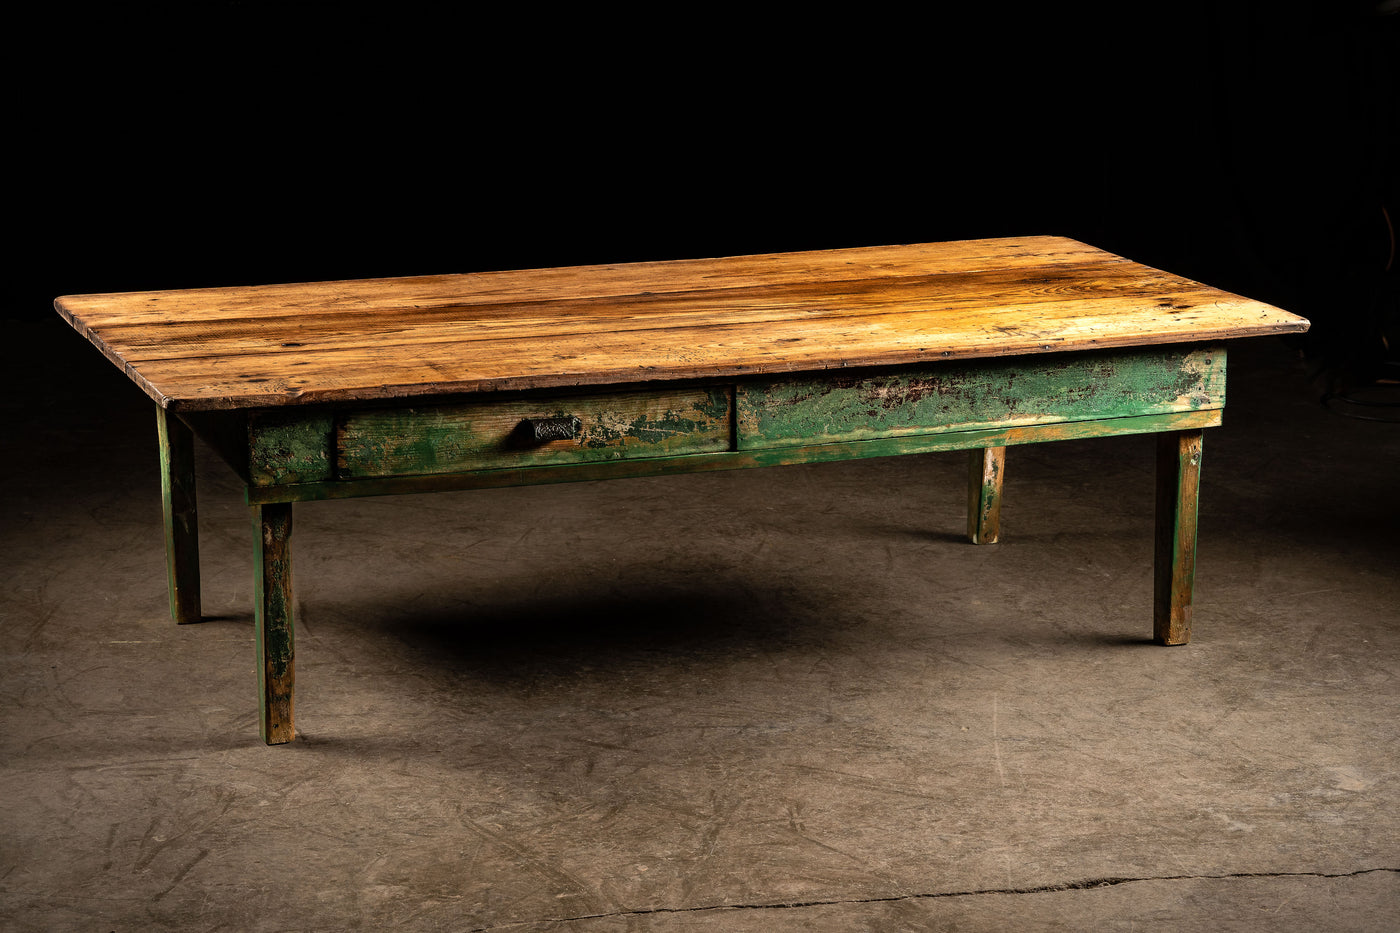 Vintage Farmhouse Coffee Table With Patina